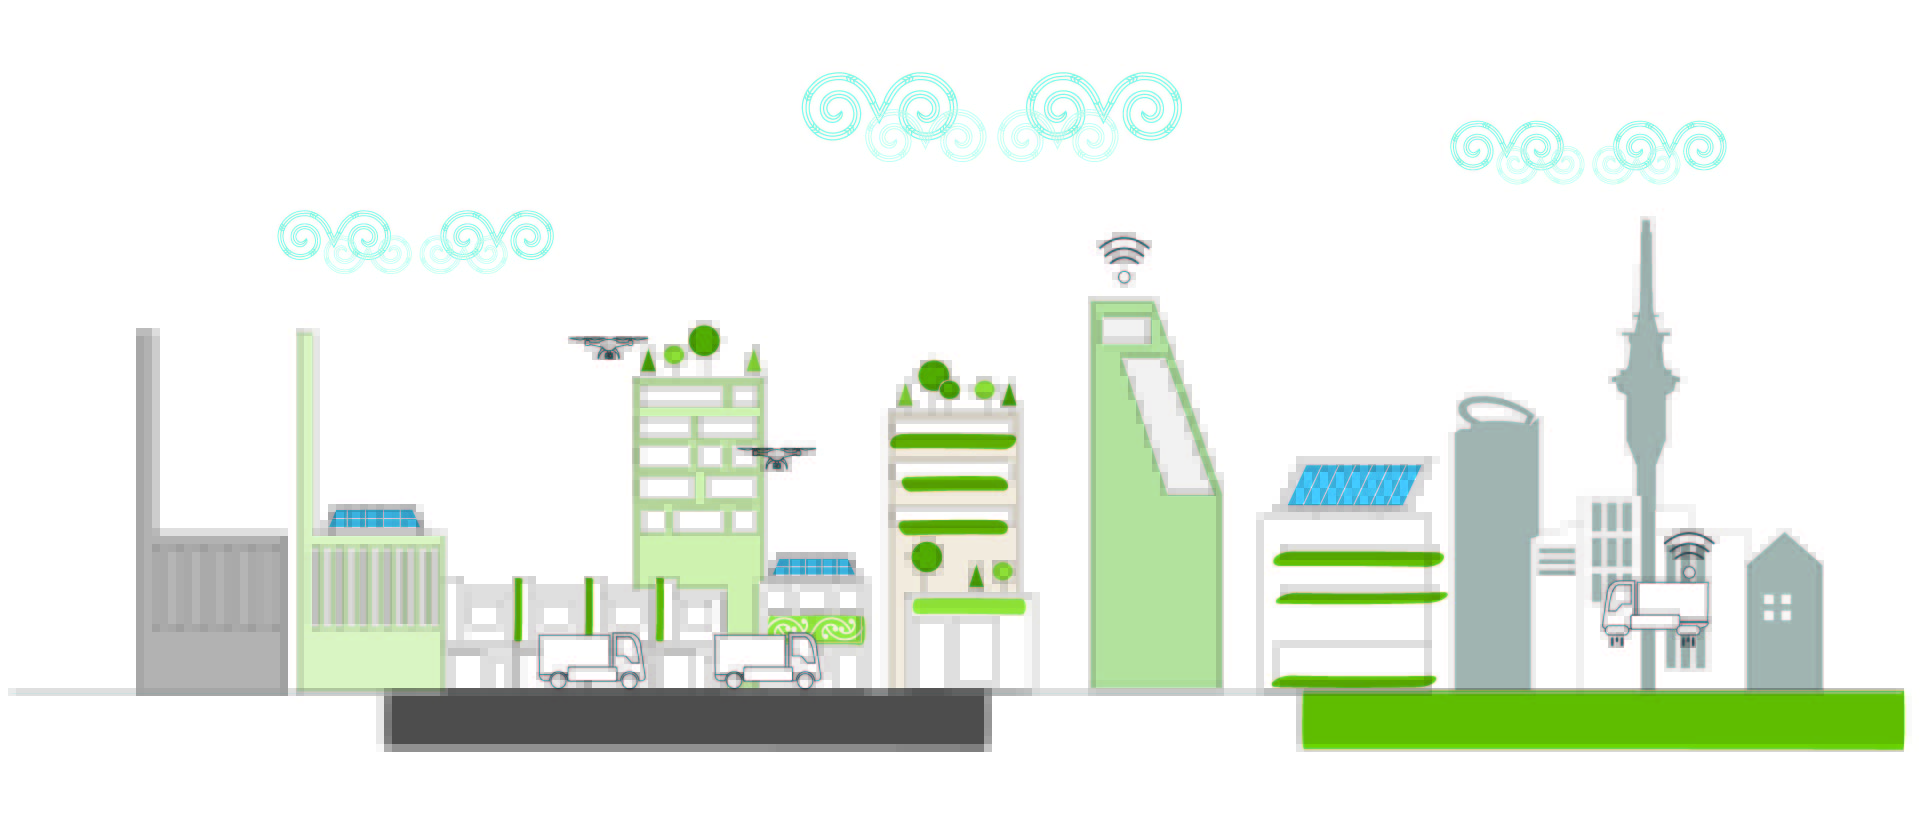 Illustration of future central Auckland with buildings that have solar panels, green roofs, and electric vehicles.